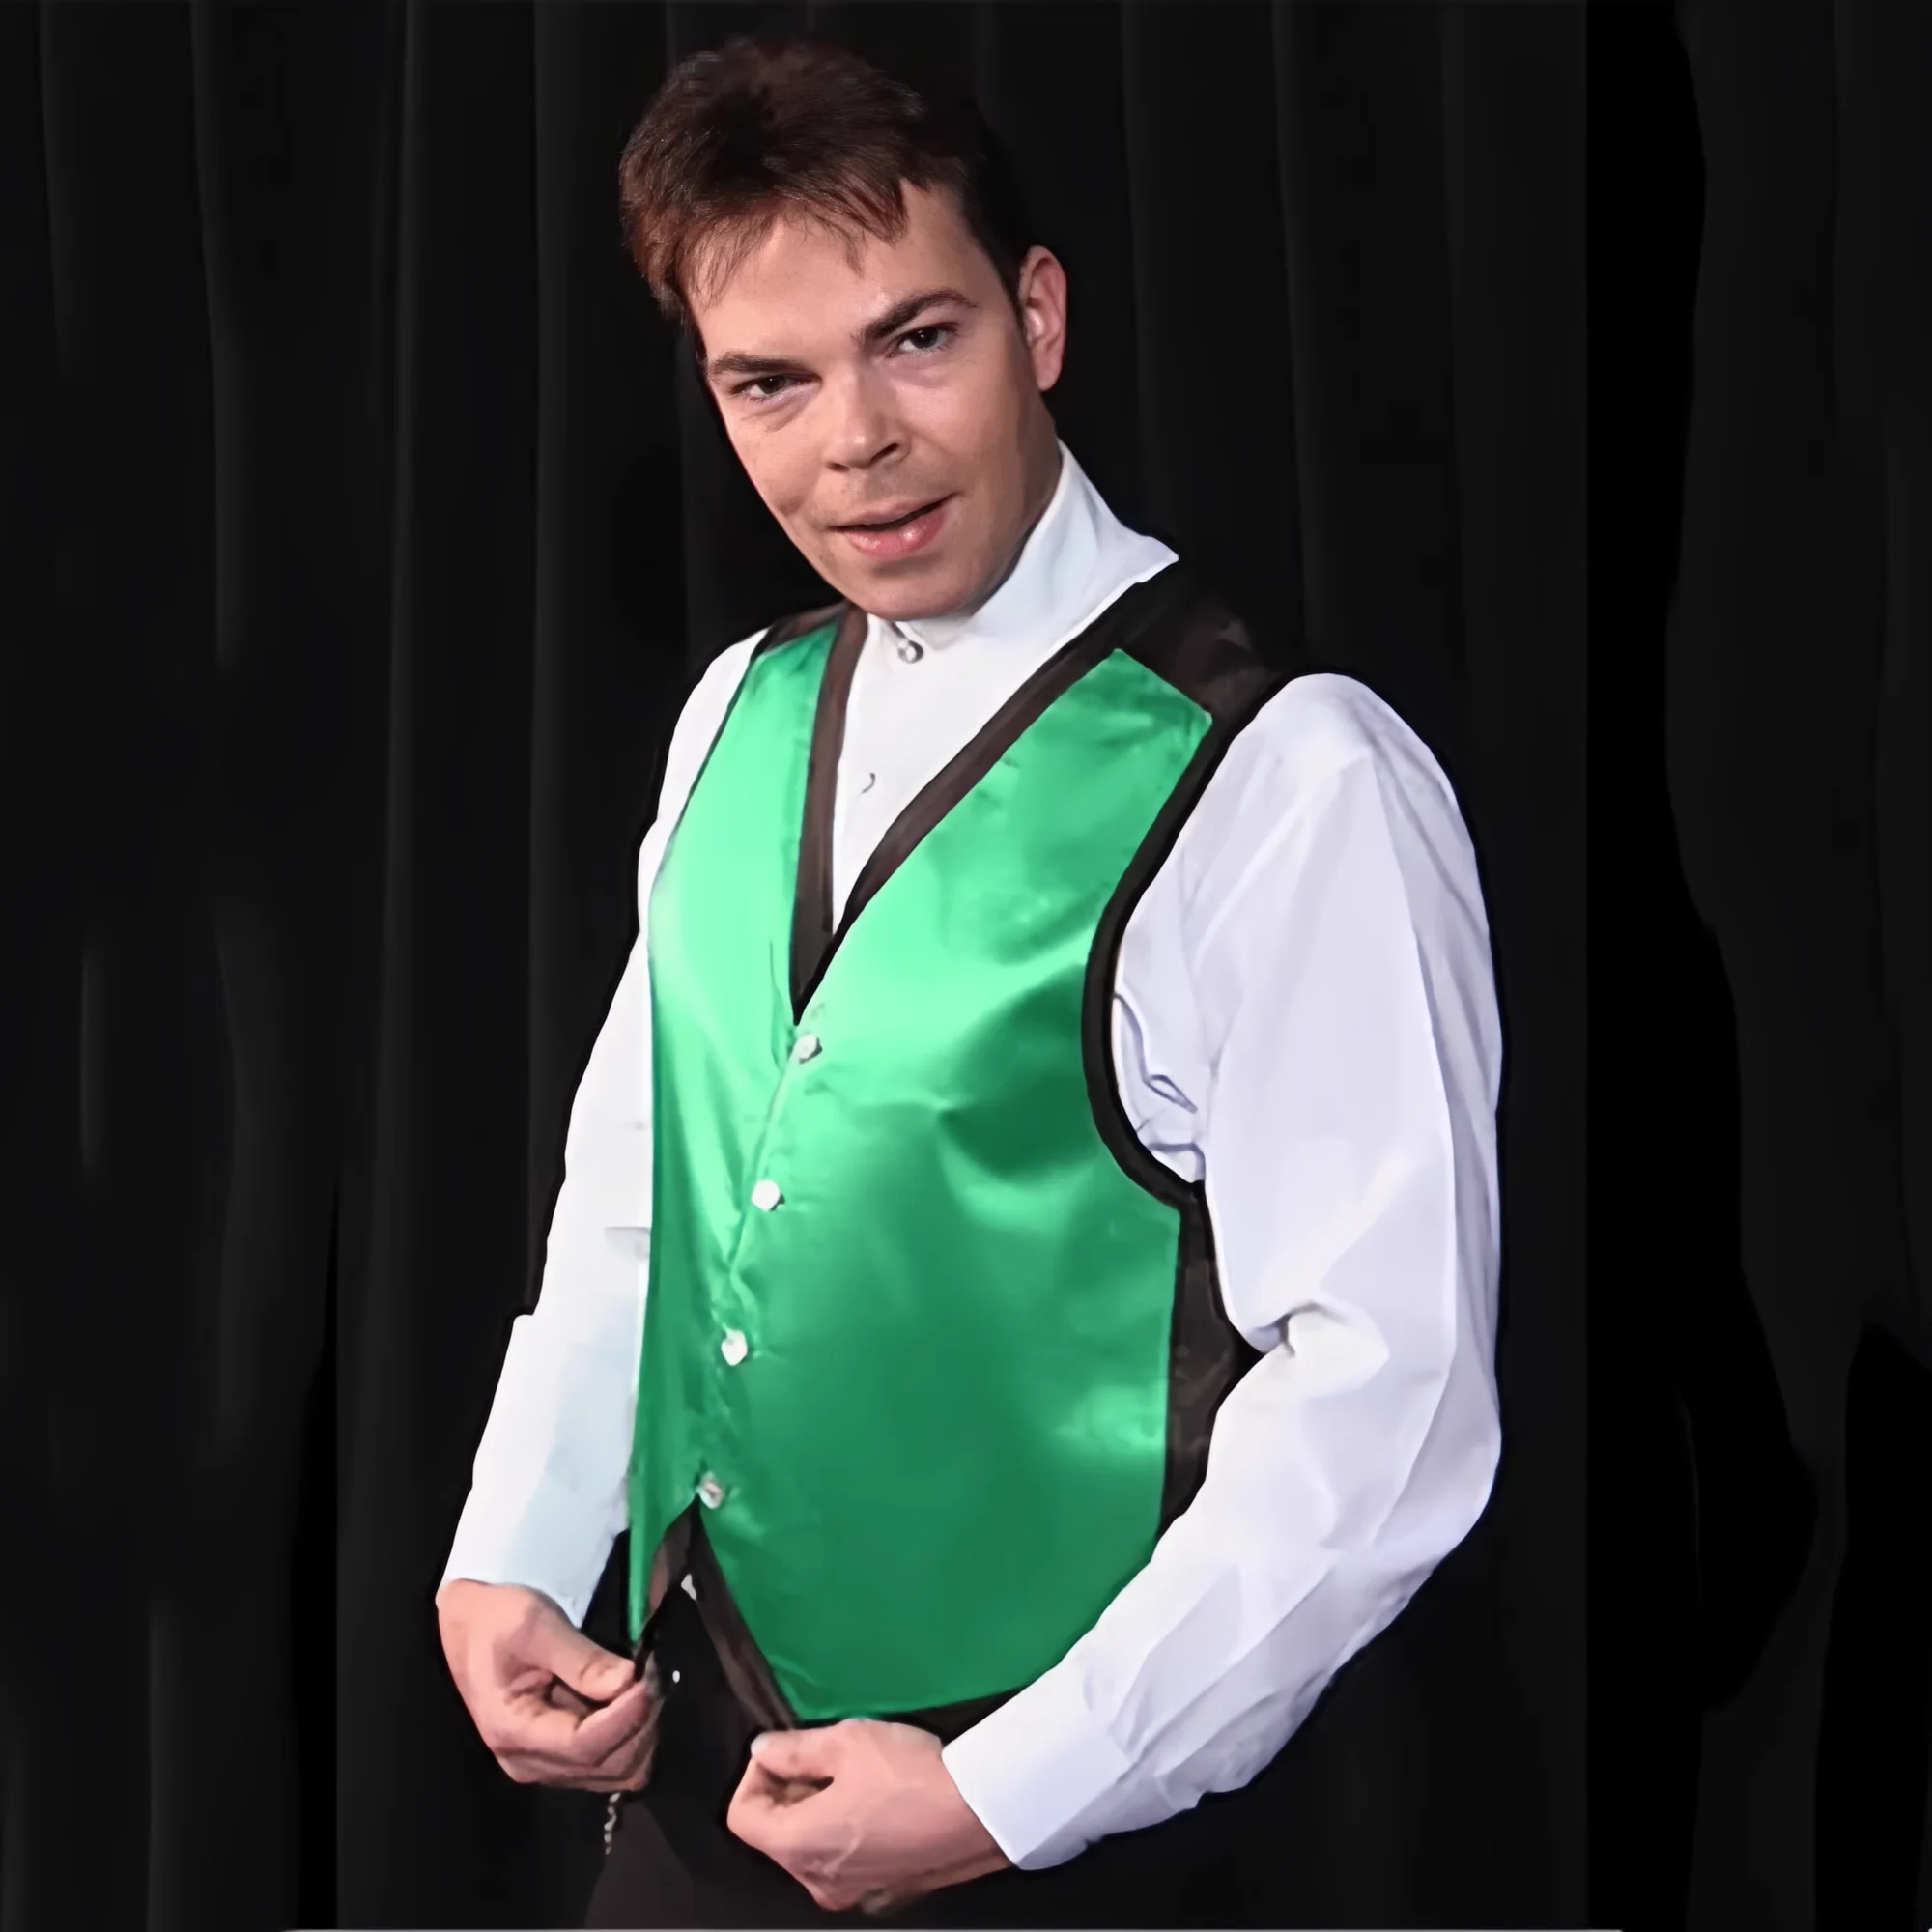 

Color Changing Vest Waistcoat Four Color Stage Magic Tricks Magician Close-up Illusions Magie Magia Accessories Mentalism